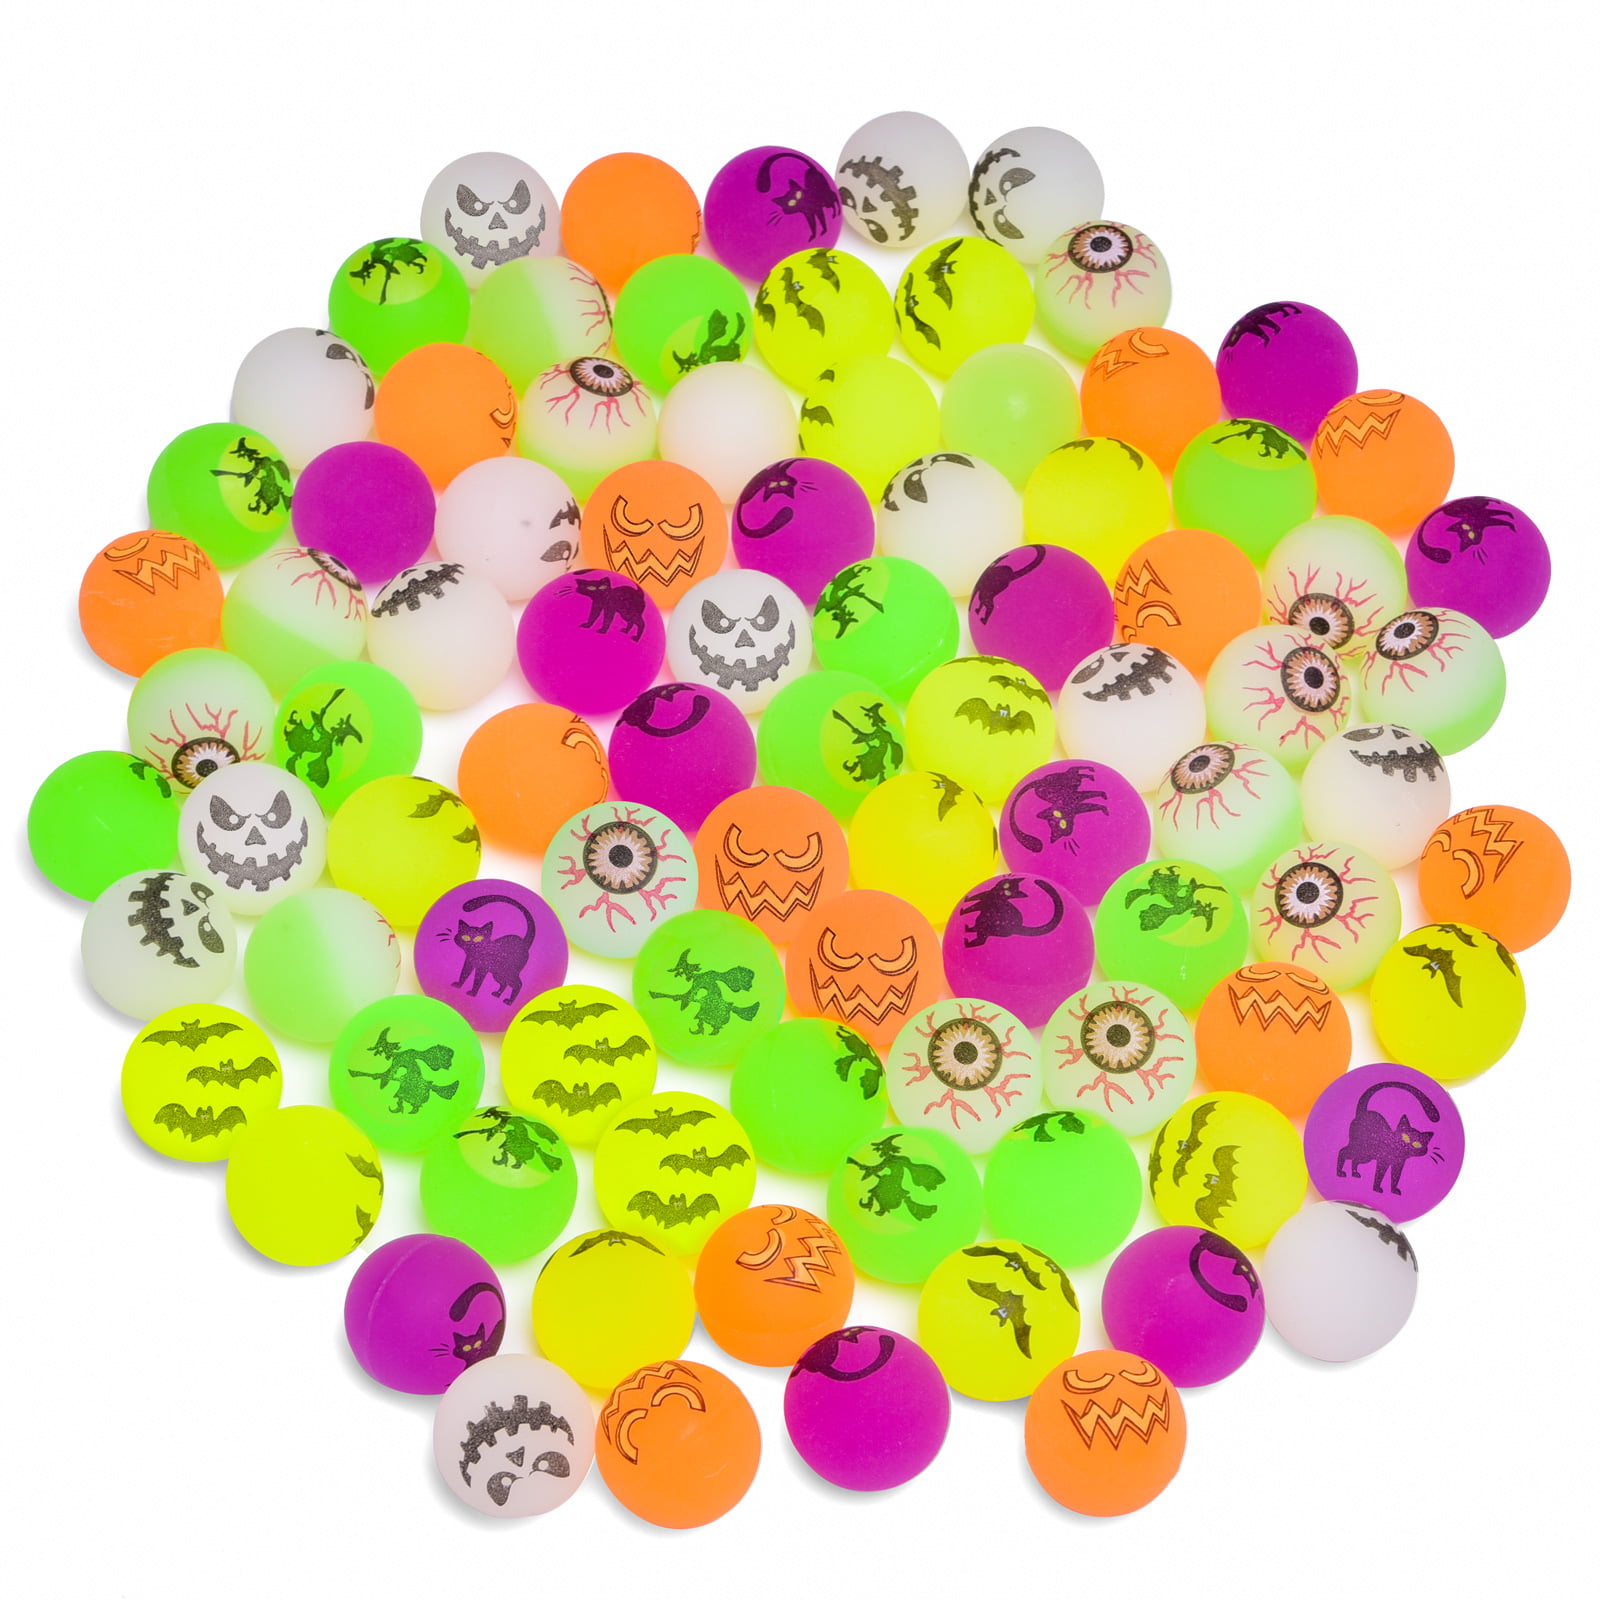 SMILE HIGH BOUNCE SUPER FAST SHIPPING!! 288 GLOW IN THE DARK SUPER BALLS 